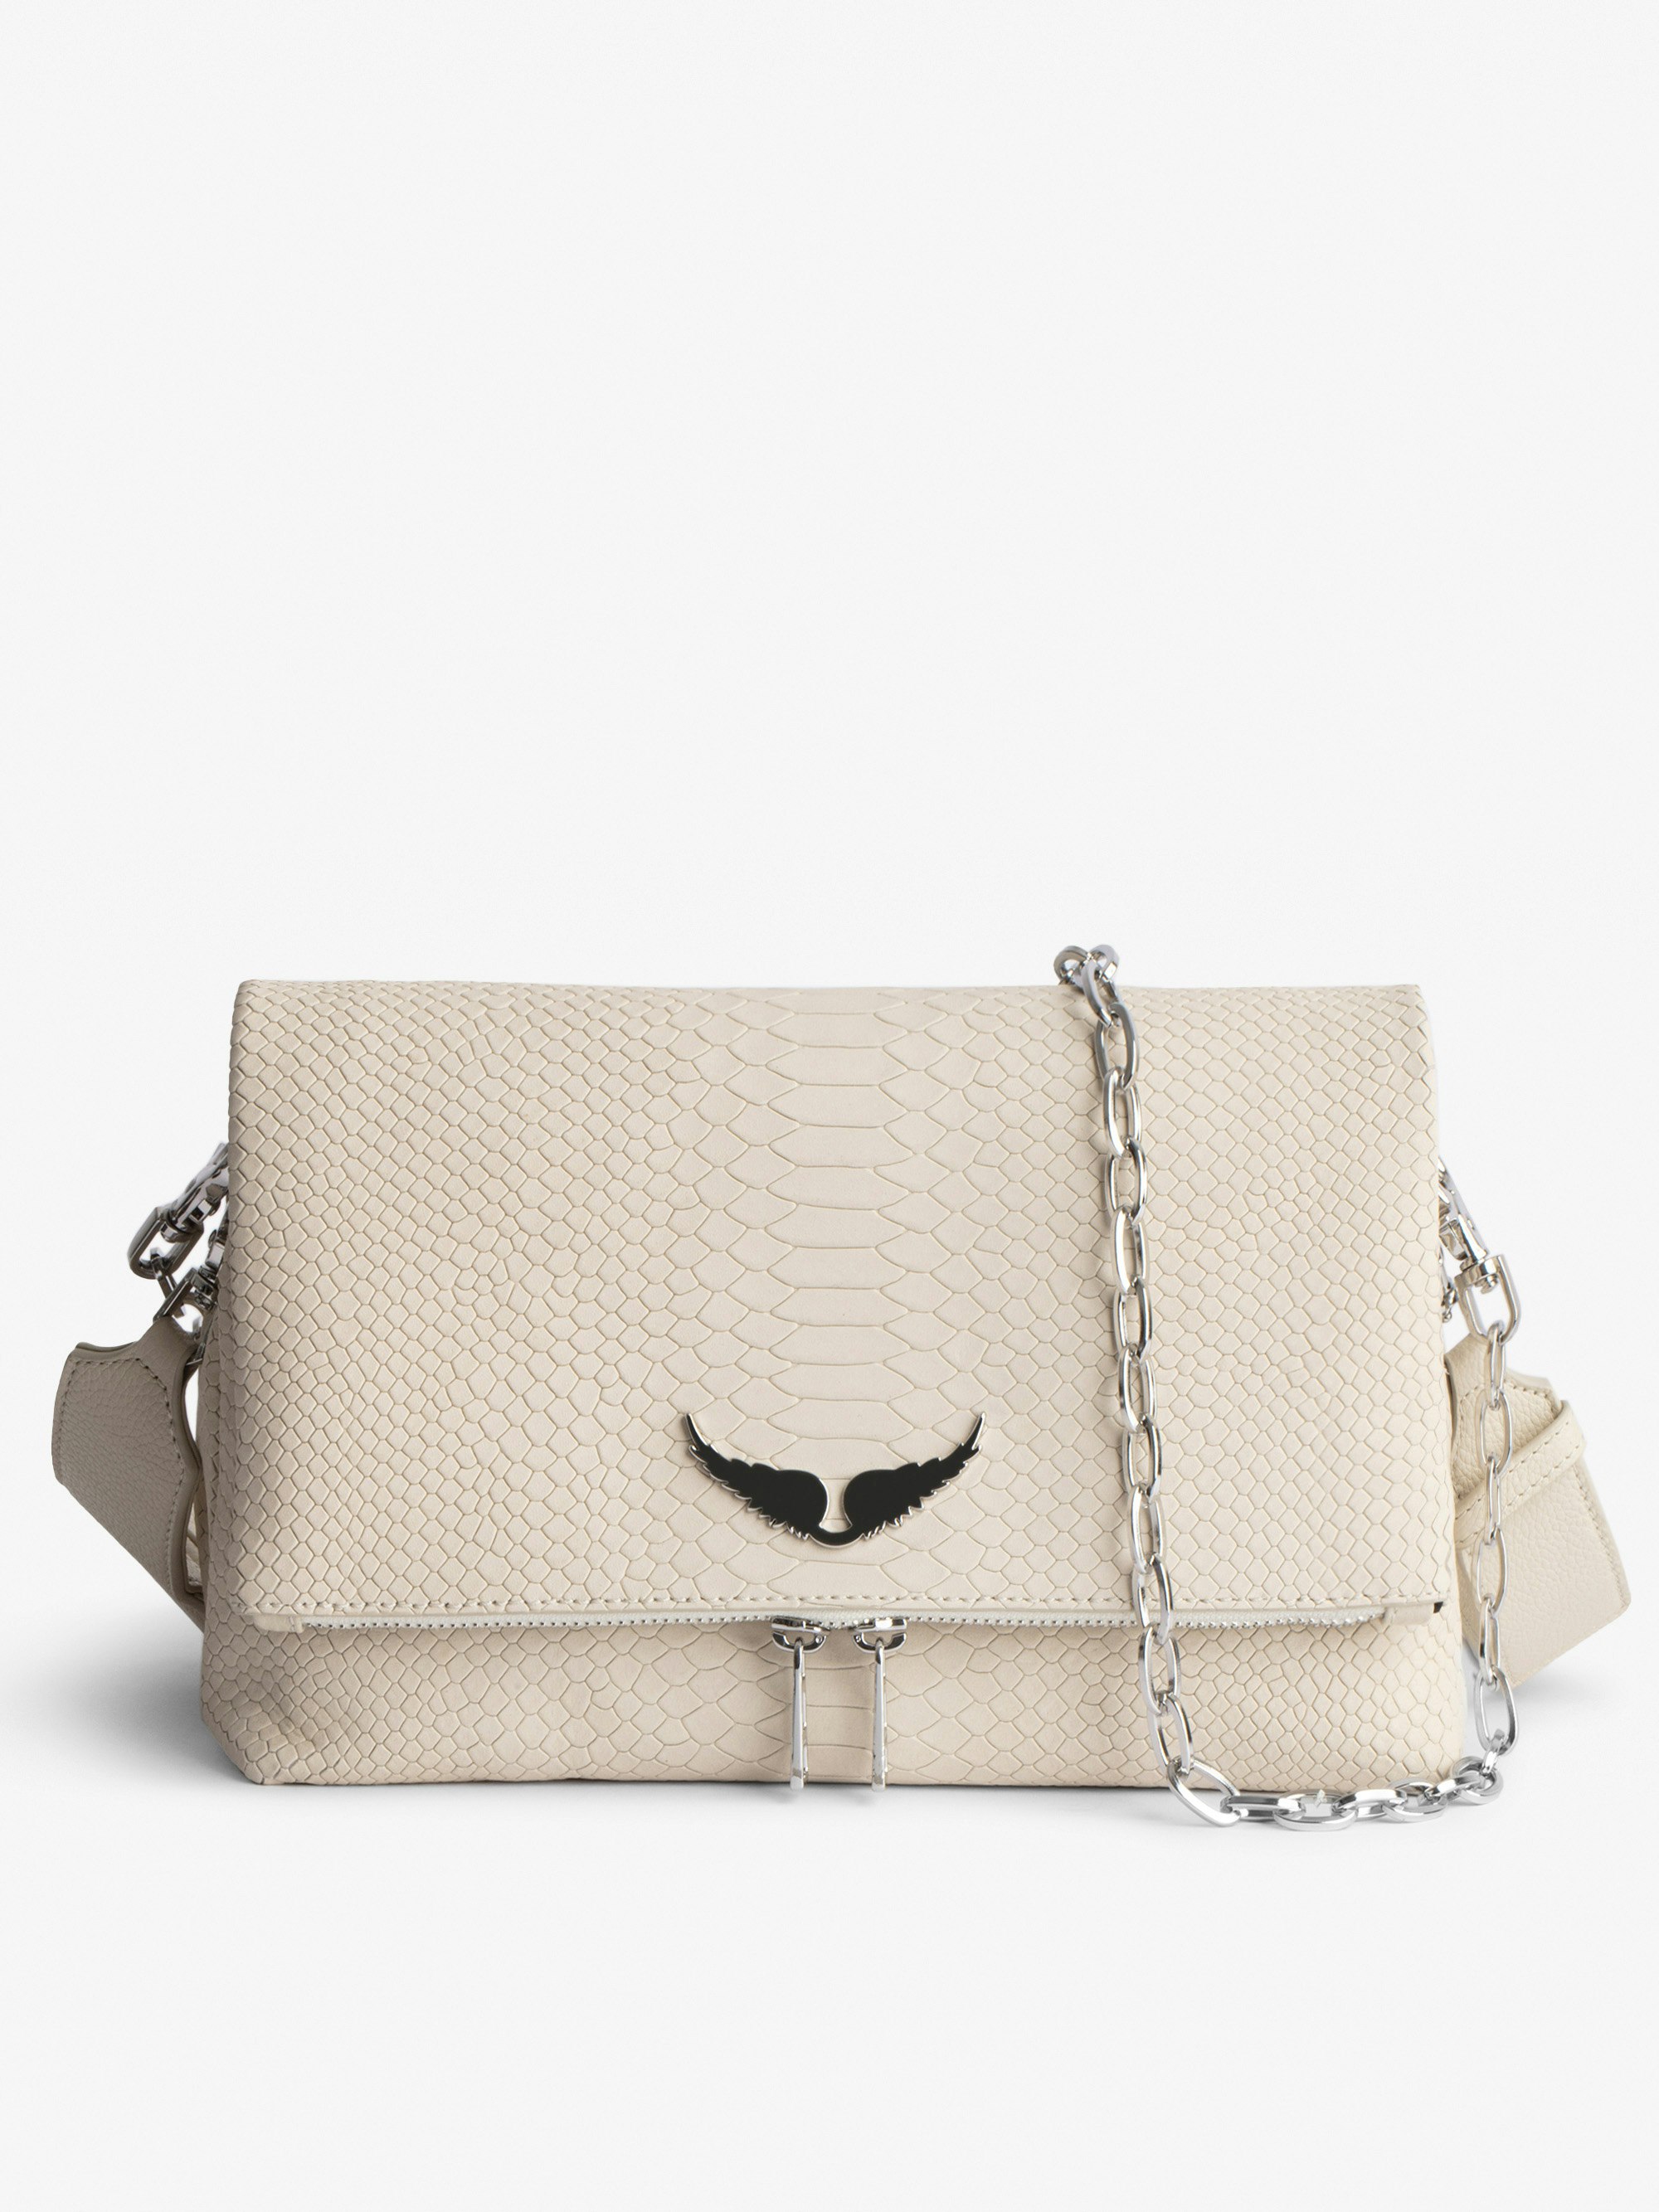 Rocky Soft Savage Bag - Women’s bag in ecru python-effect leather with a chain shoulder strap